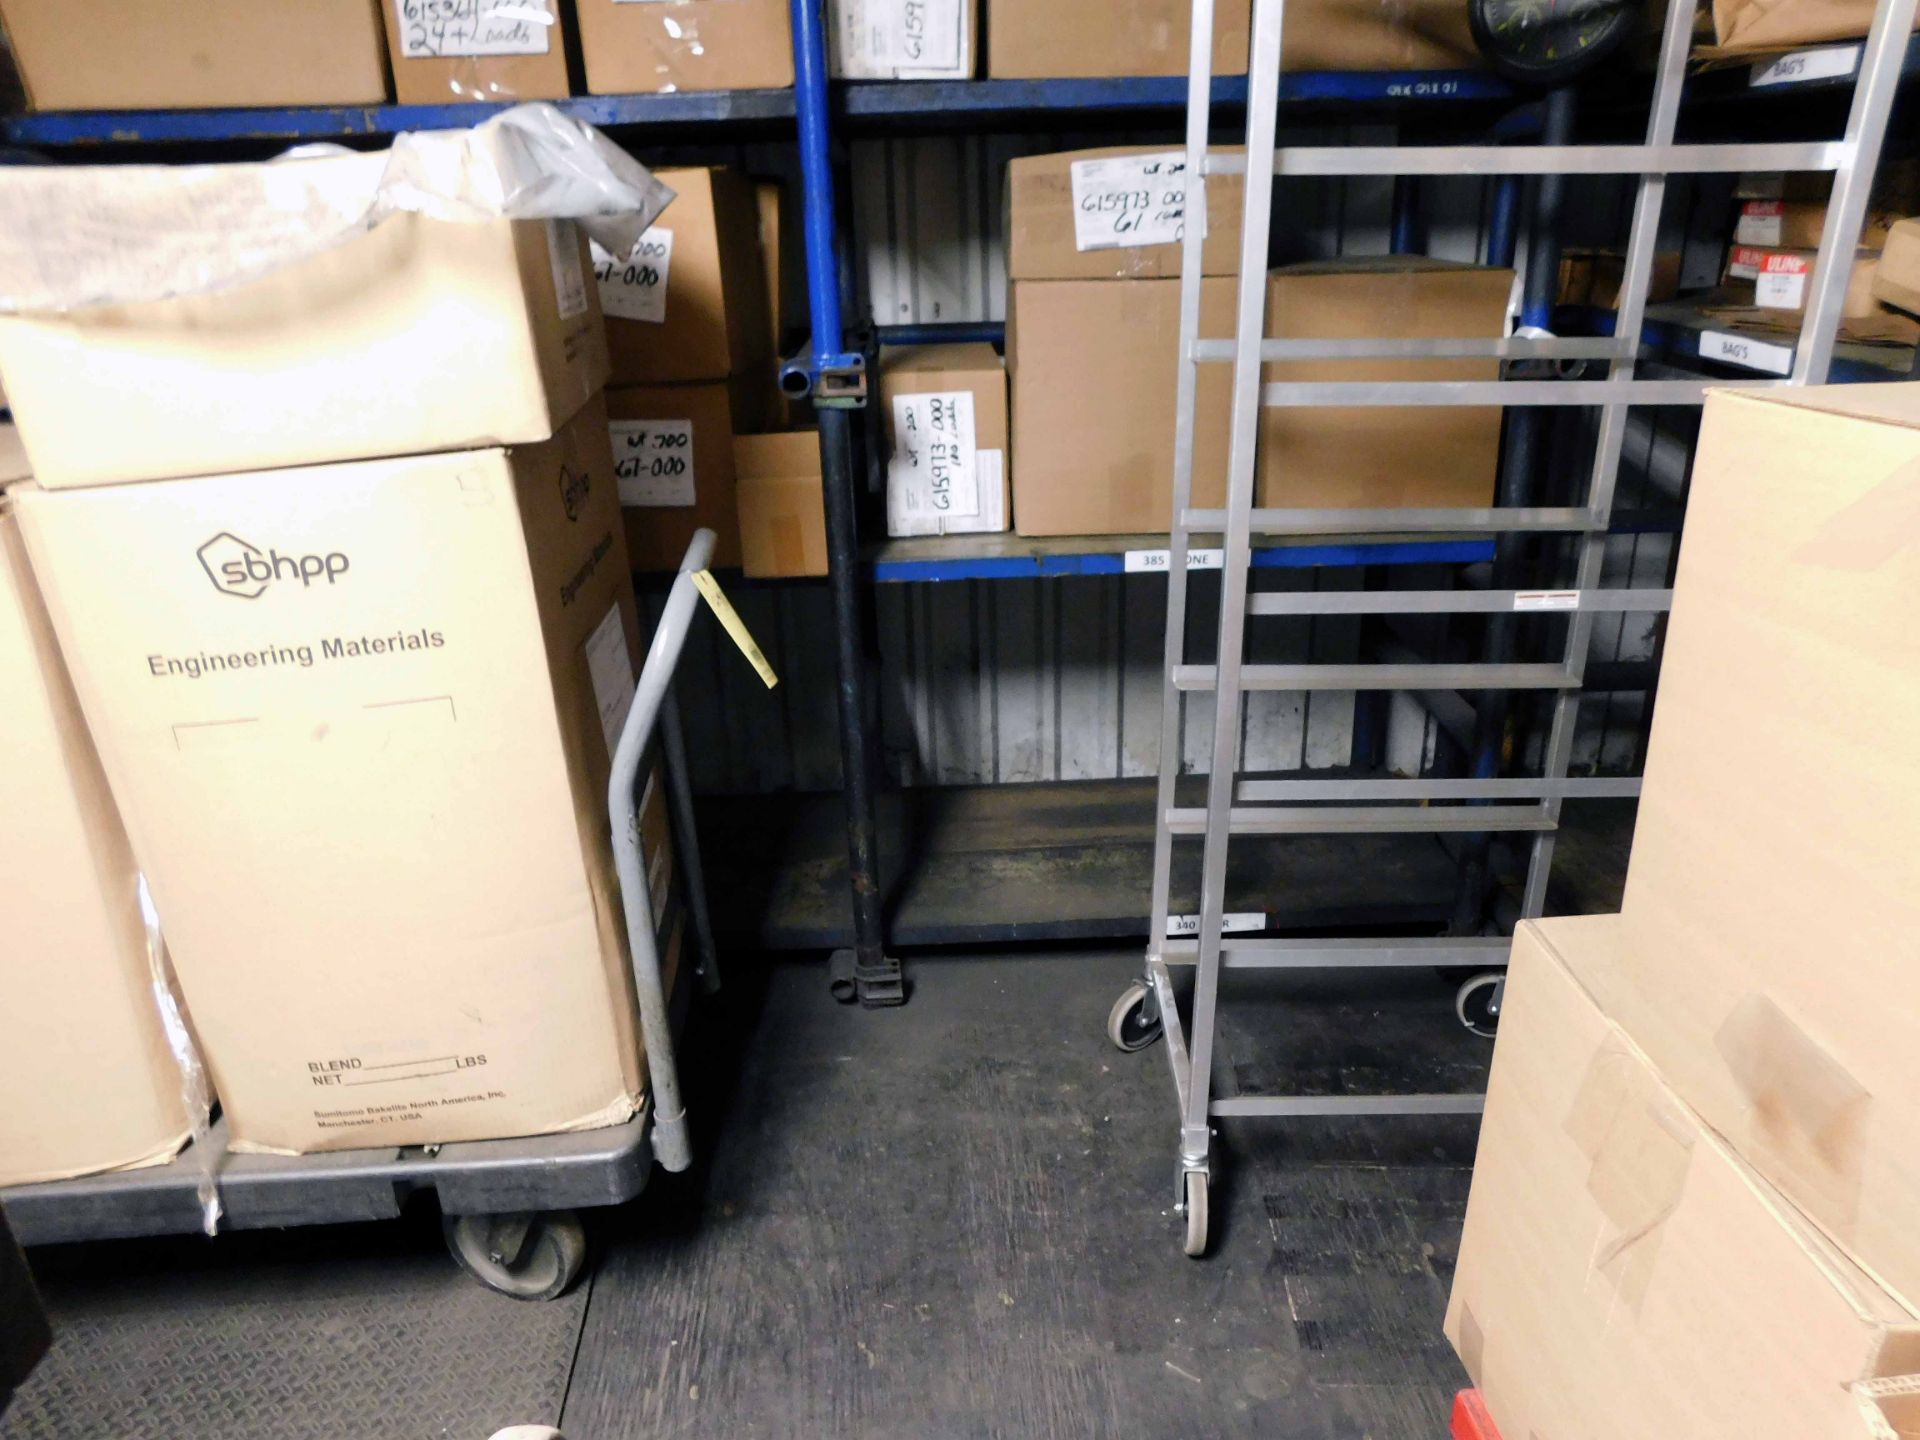 LOT CONSISTING OF: hydraulic lift cart, (2) roller shop carts & assorted pipe shelving (cannot be - Image 2 of 3